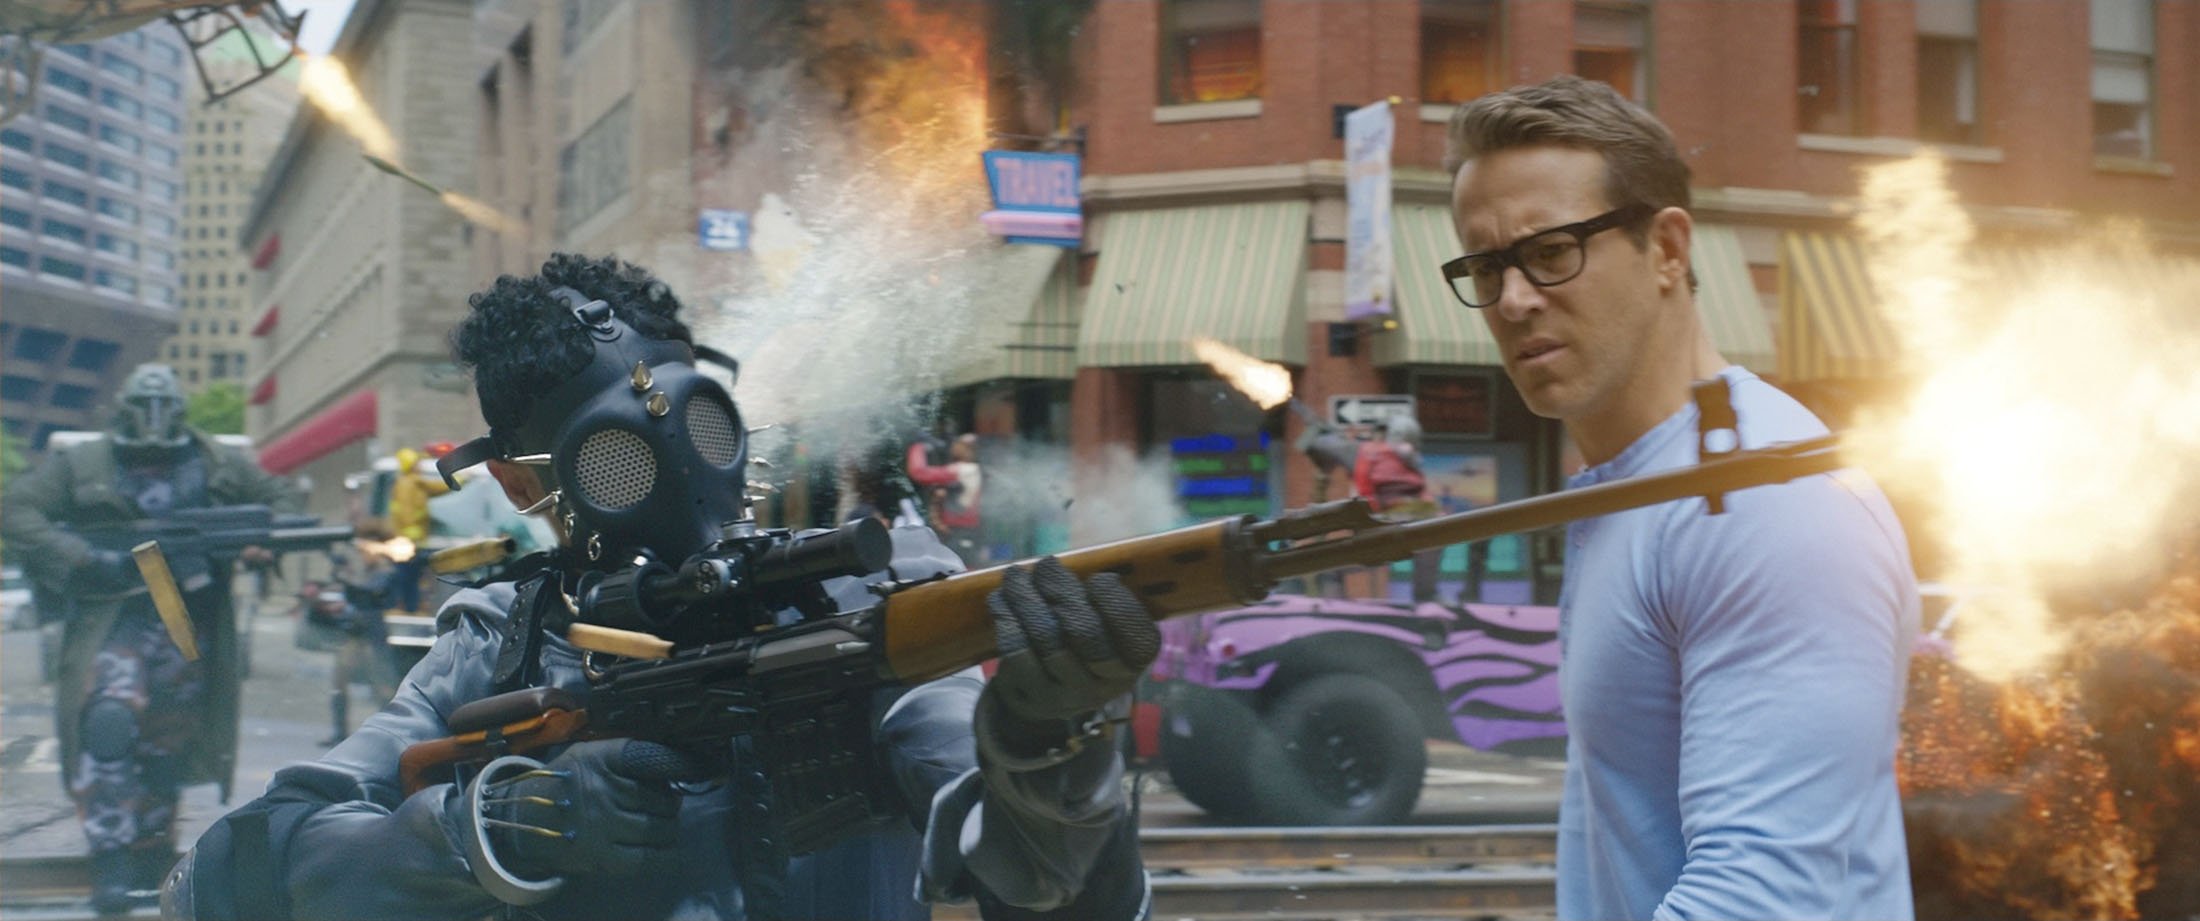 Ryan Reynolds (R) is in the middle of a chaotic scene in the movie 